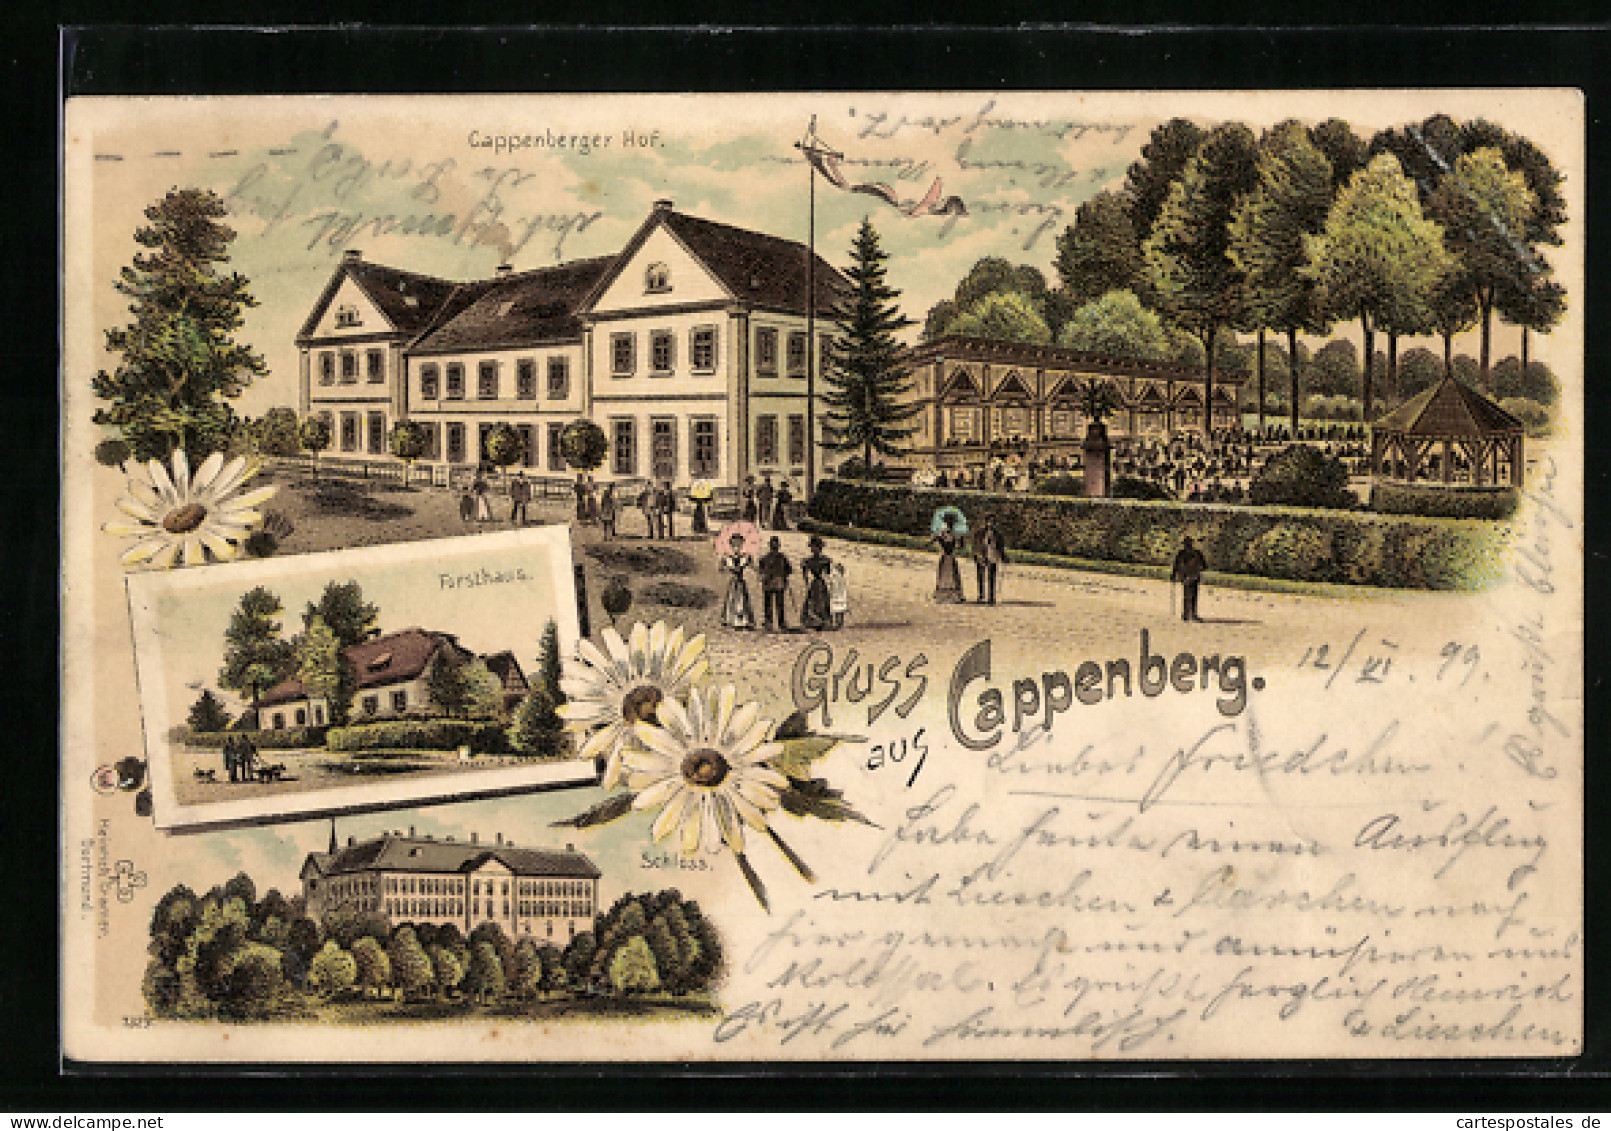 Lithographie Cappenberg, Gasthaus Cappenberger Hof, Forsthaus Schloss  - Hunting